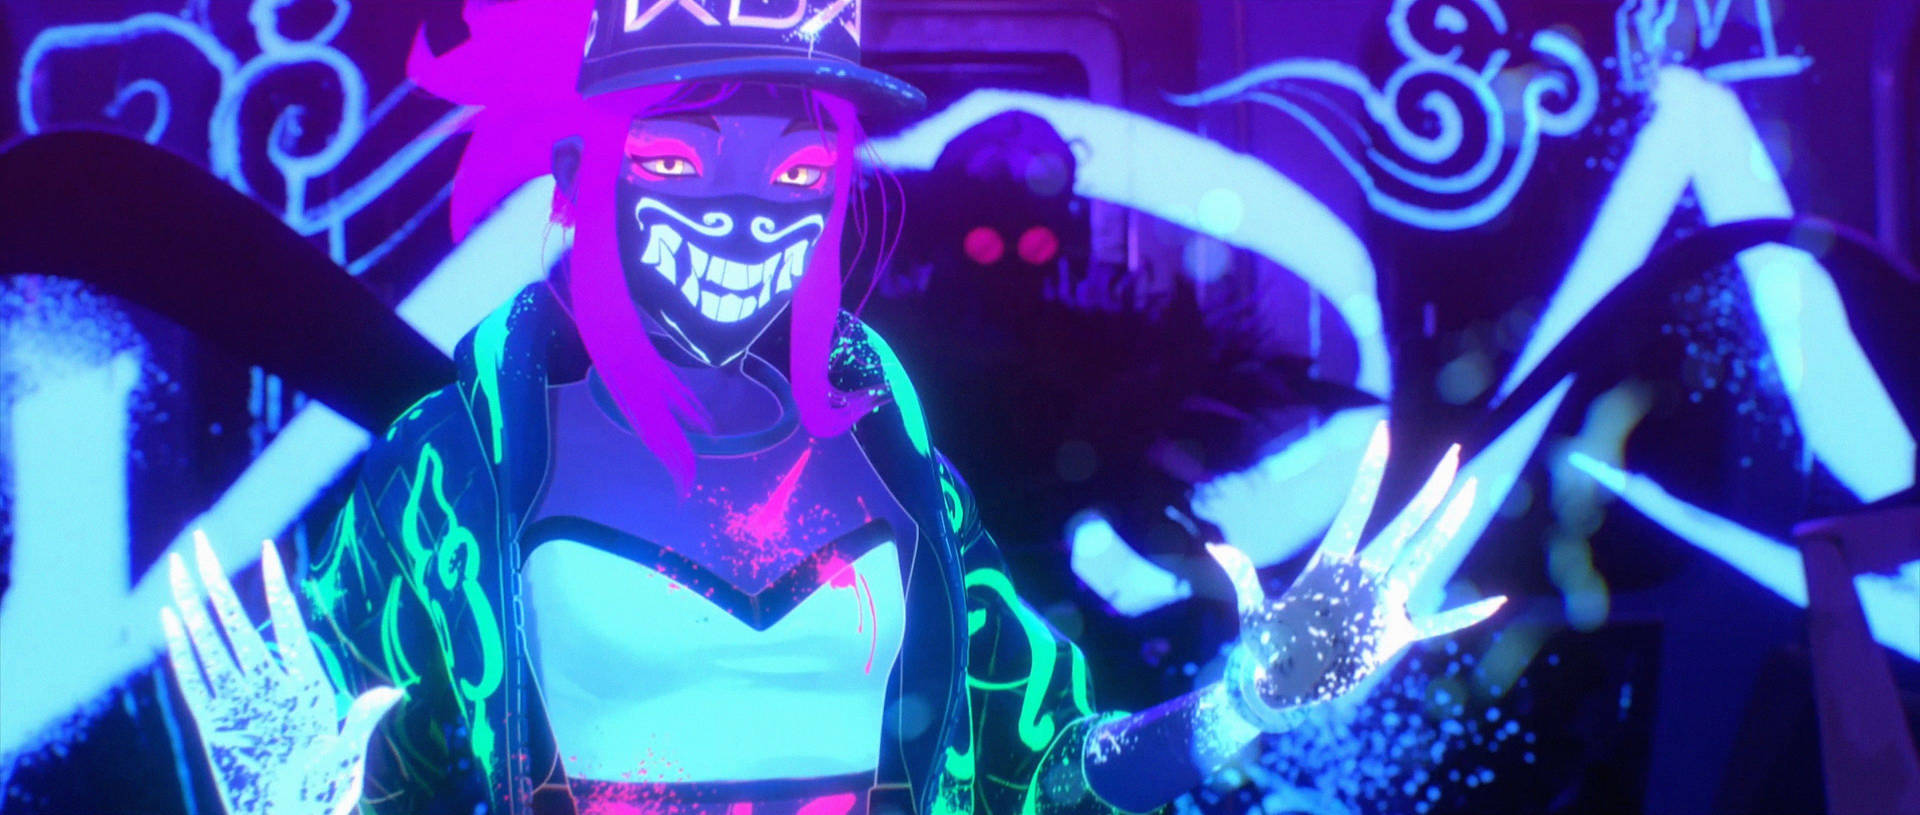 Kda 3840X1630 Wallpaper and Background Image